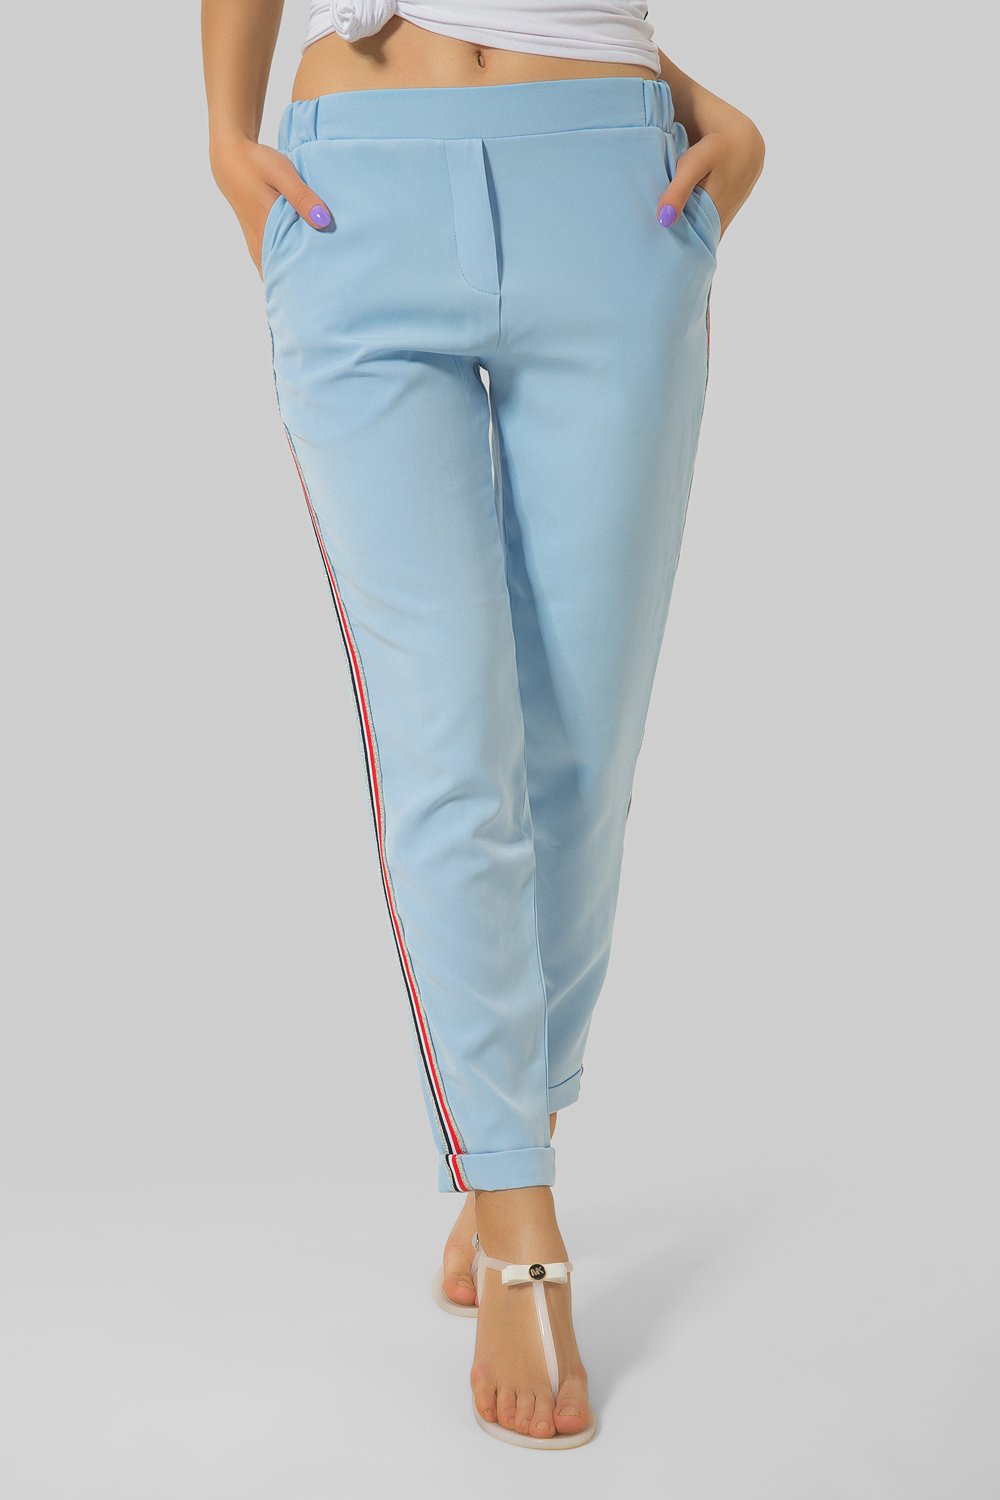 Light blue pants with lampposts